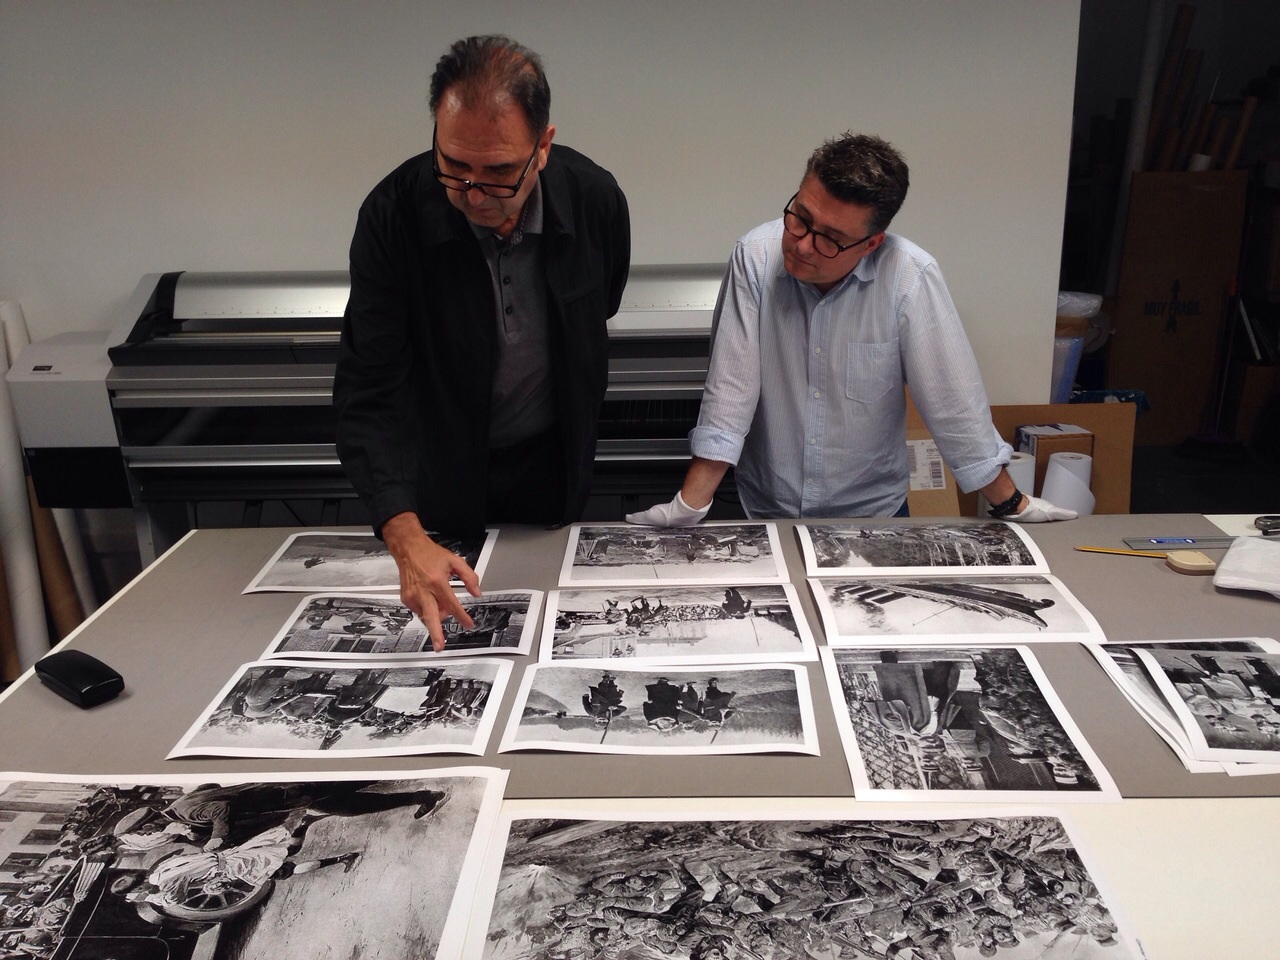 Enrique Viciano and Paco Mora, photographer. Photos for Exposition of The First World War